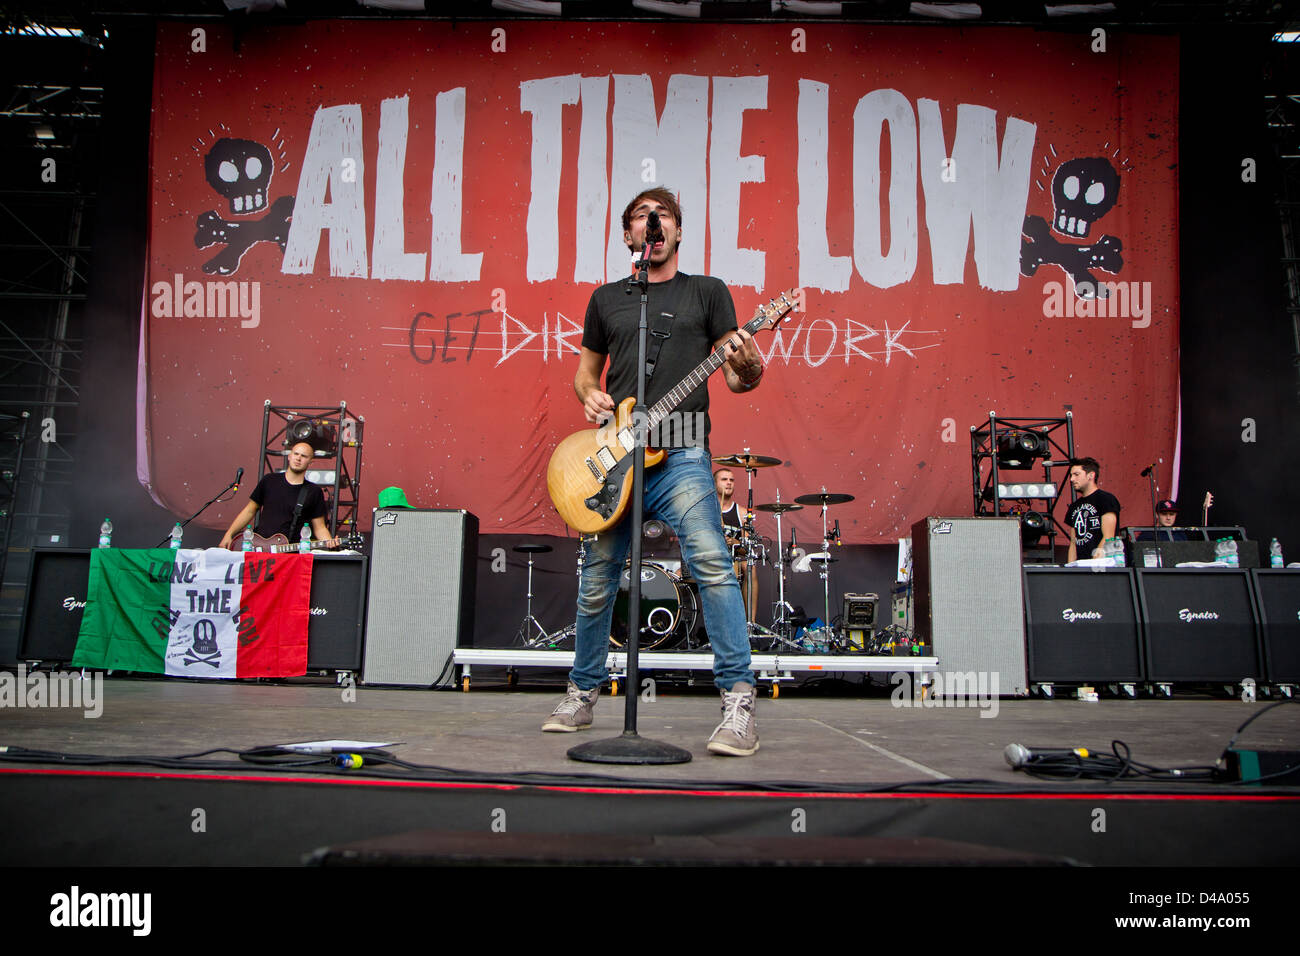 Saptember 02, 2012 - All Time Low performs live at the Arena Parco Nord, Bologna, Italy Stock Photo